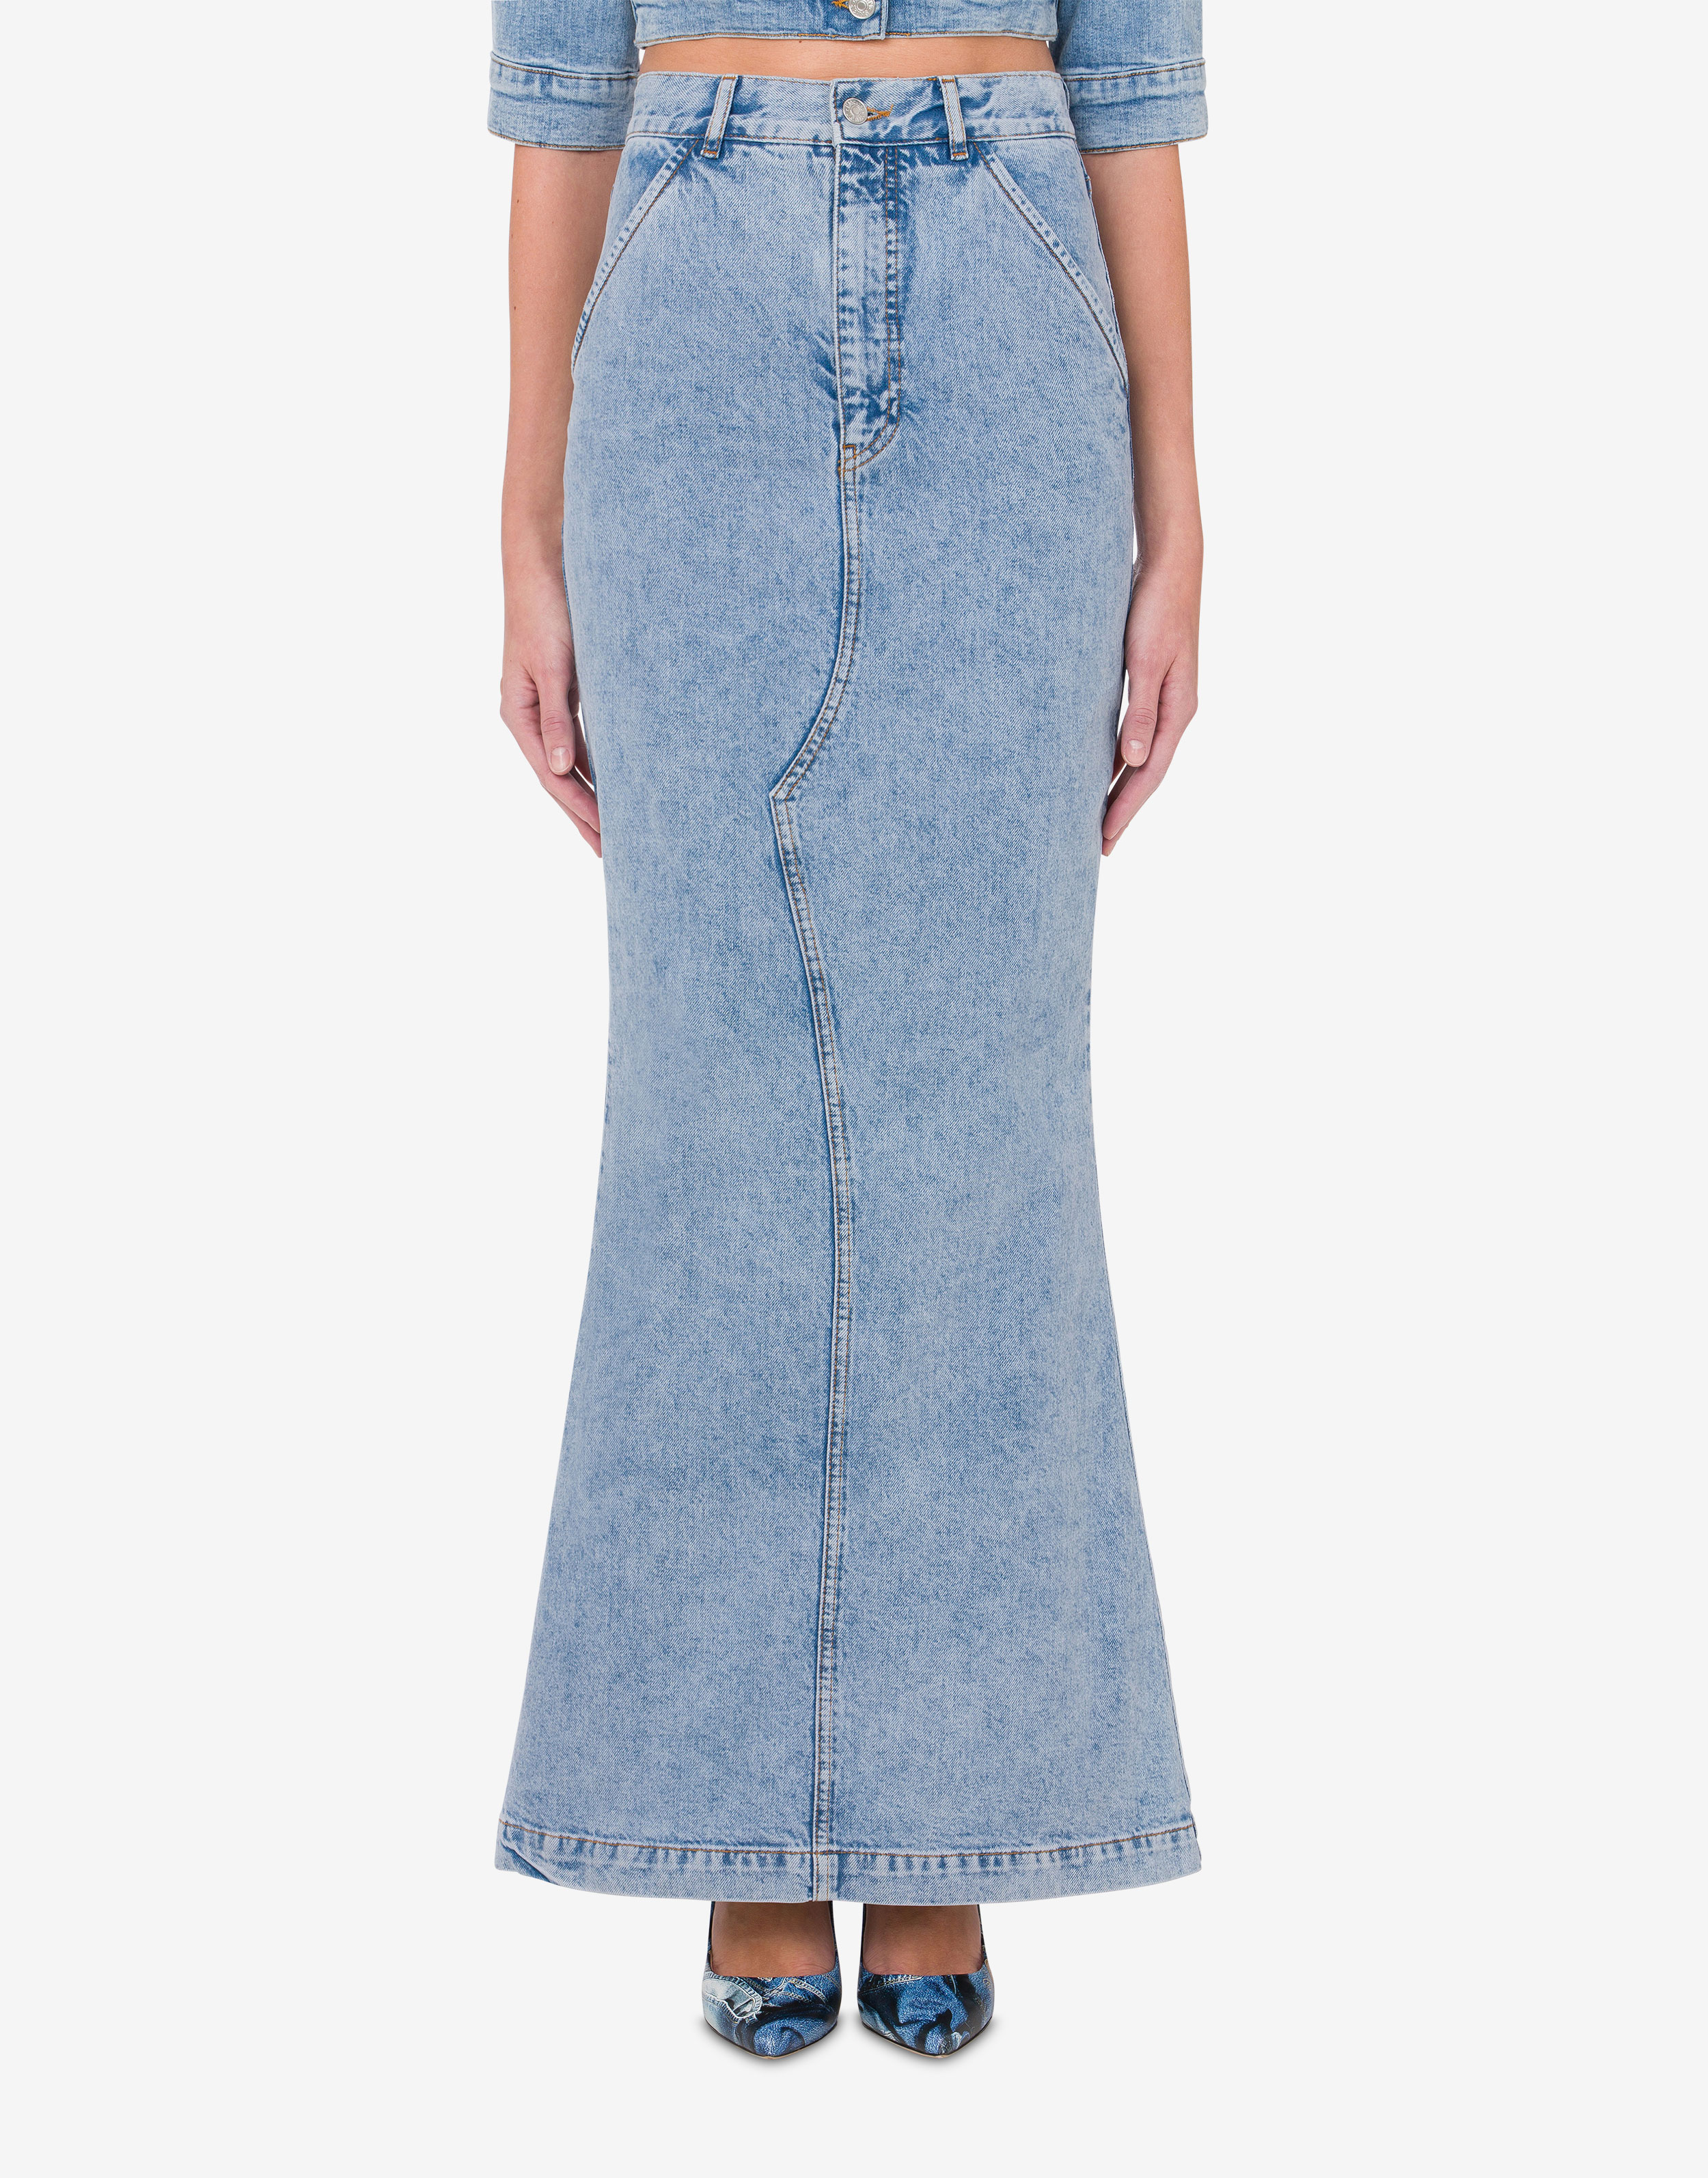 Recycled denim long | Official skirt Moschino Store